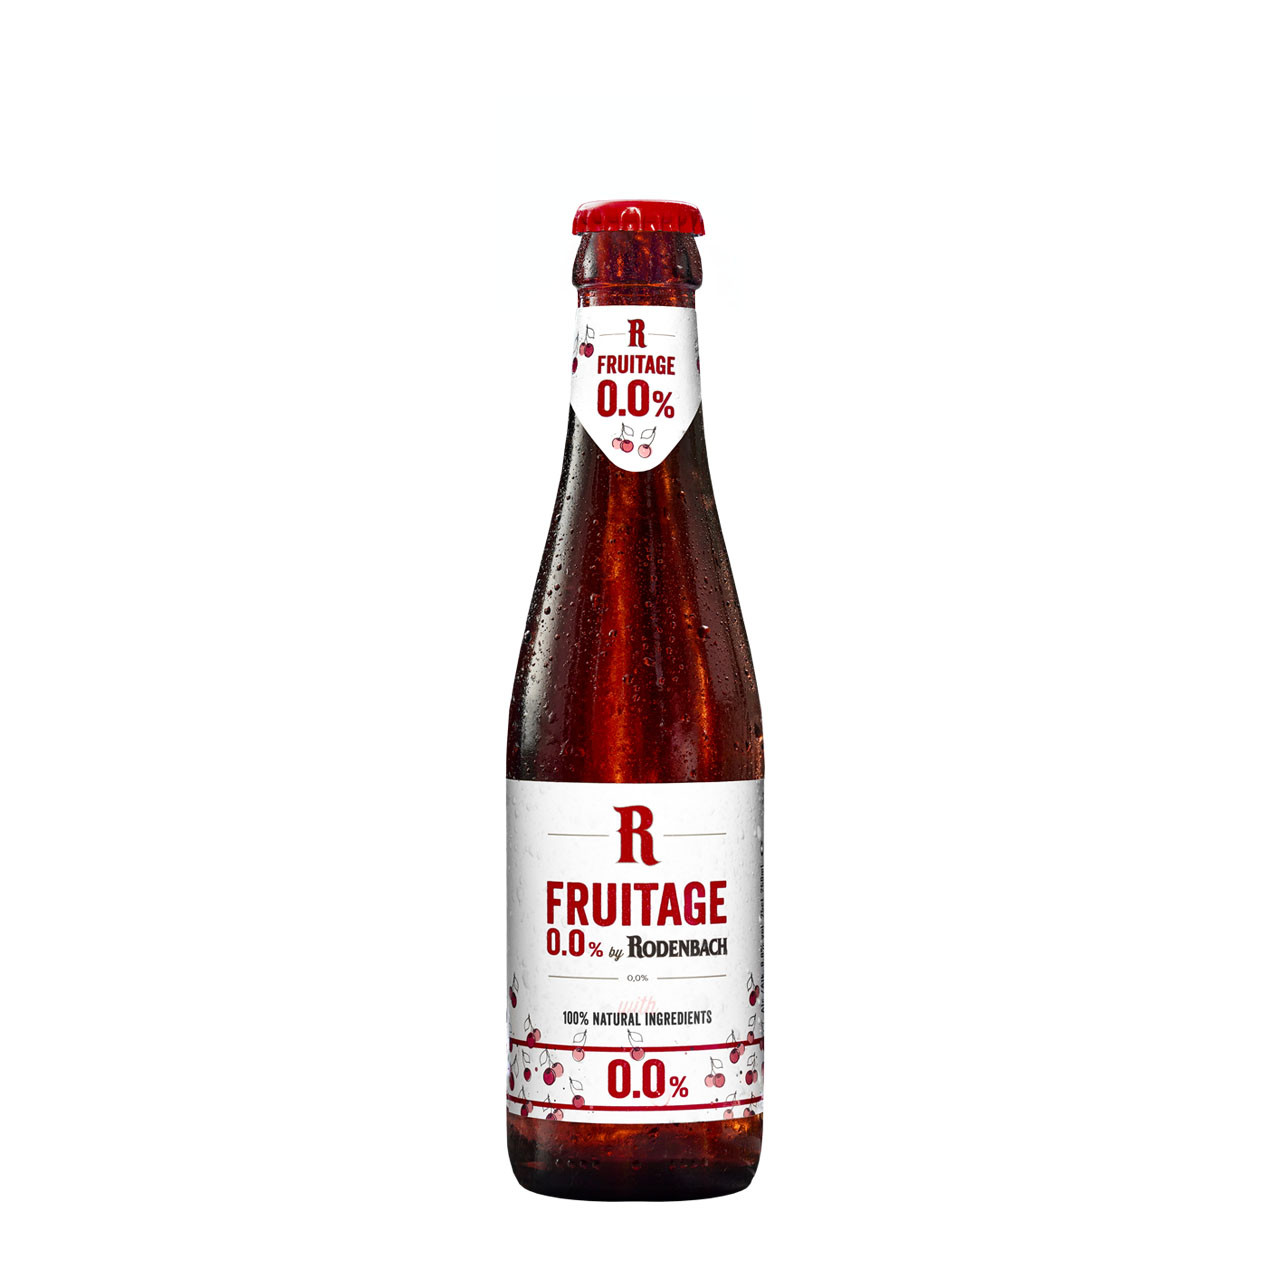 Fruitage by Rodenbach 0.0% fles 25cl. is het fruitbier van Rodenbach 0.0% alcohol.